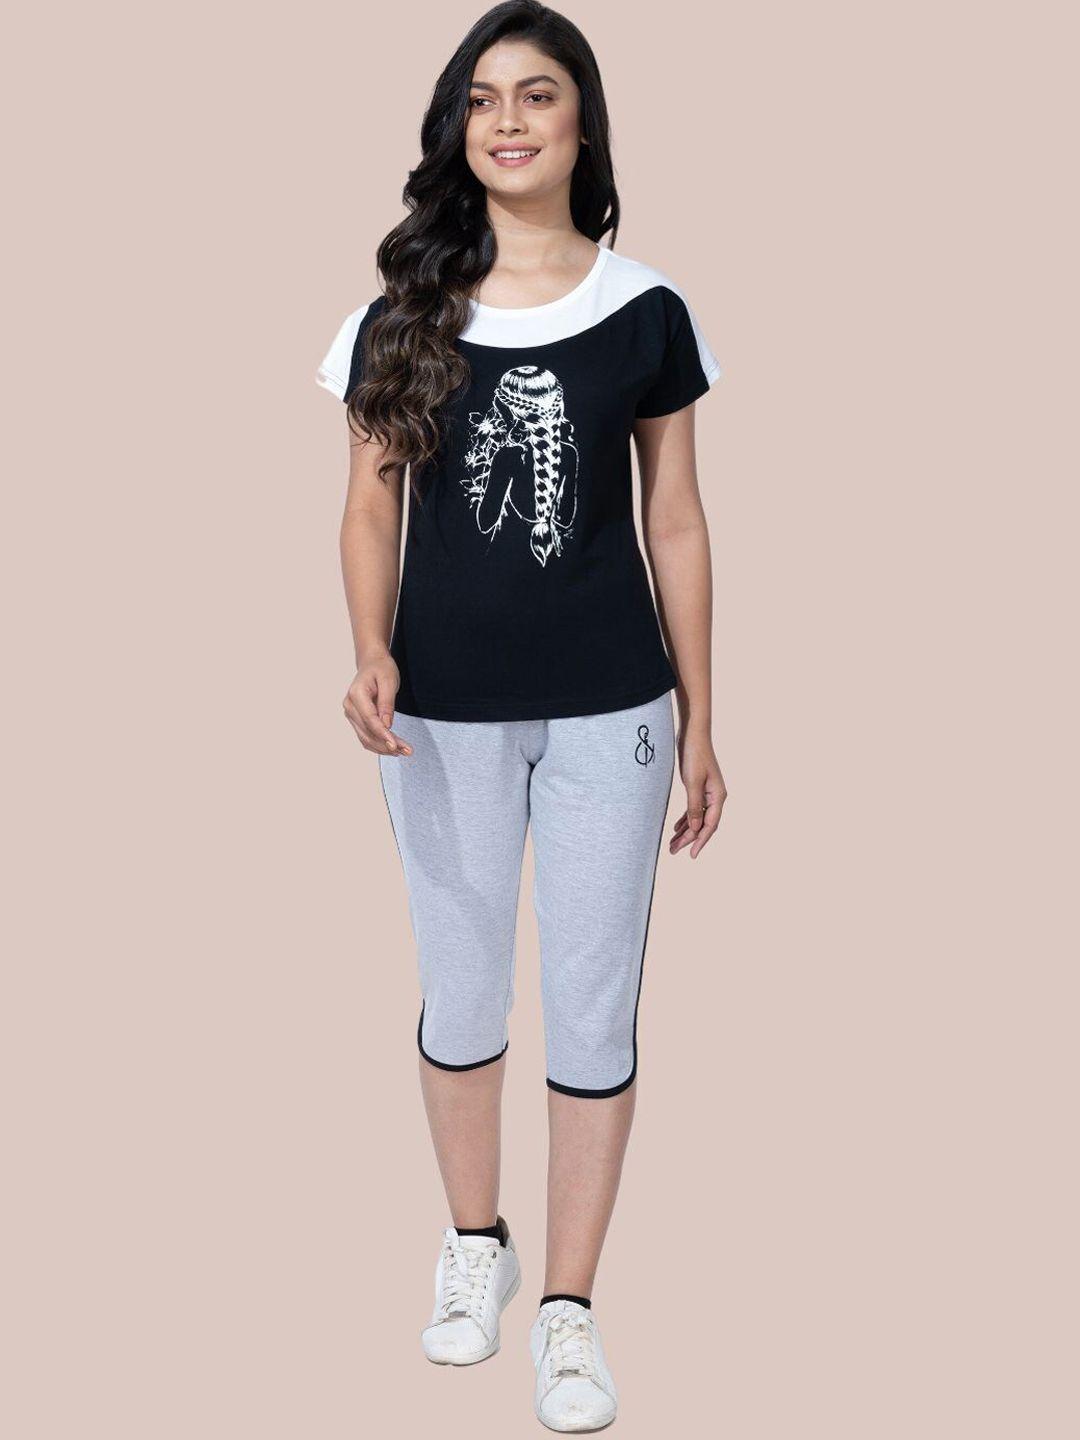 styleaone pure cotton printed t-shirt with capri